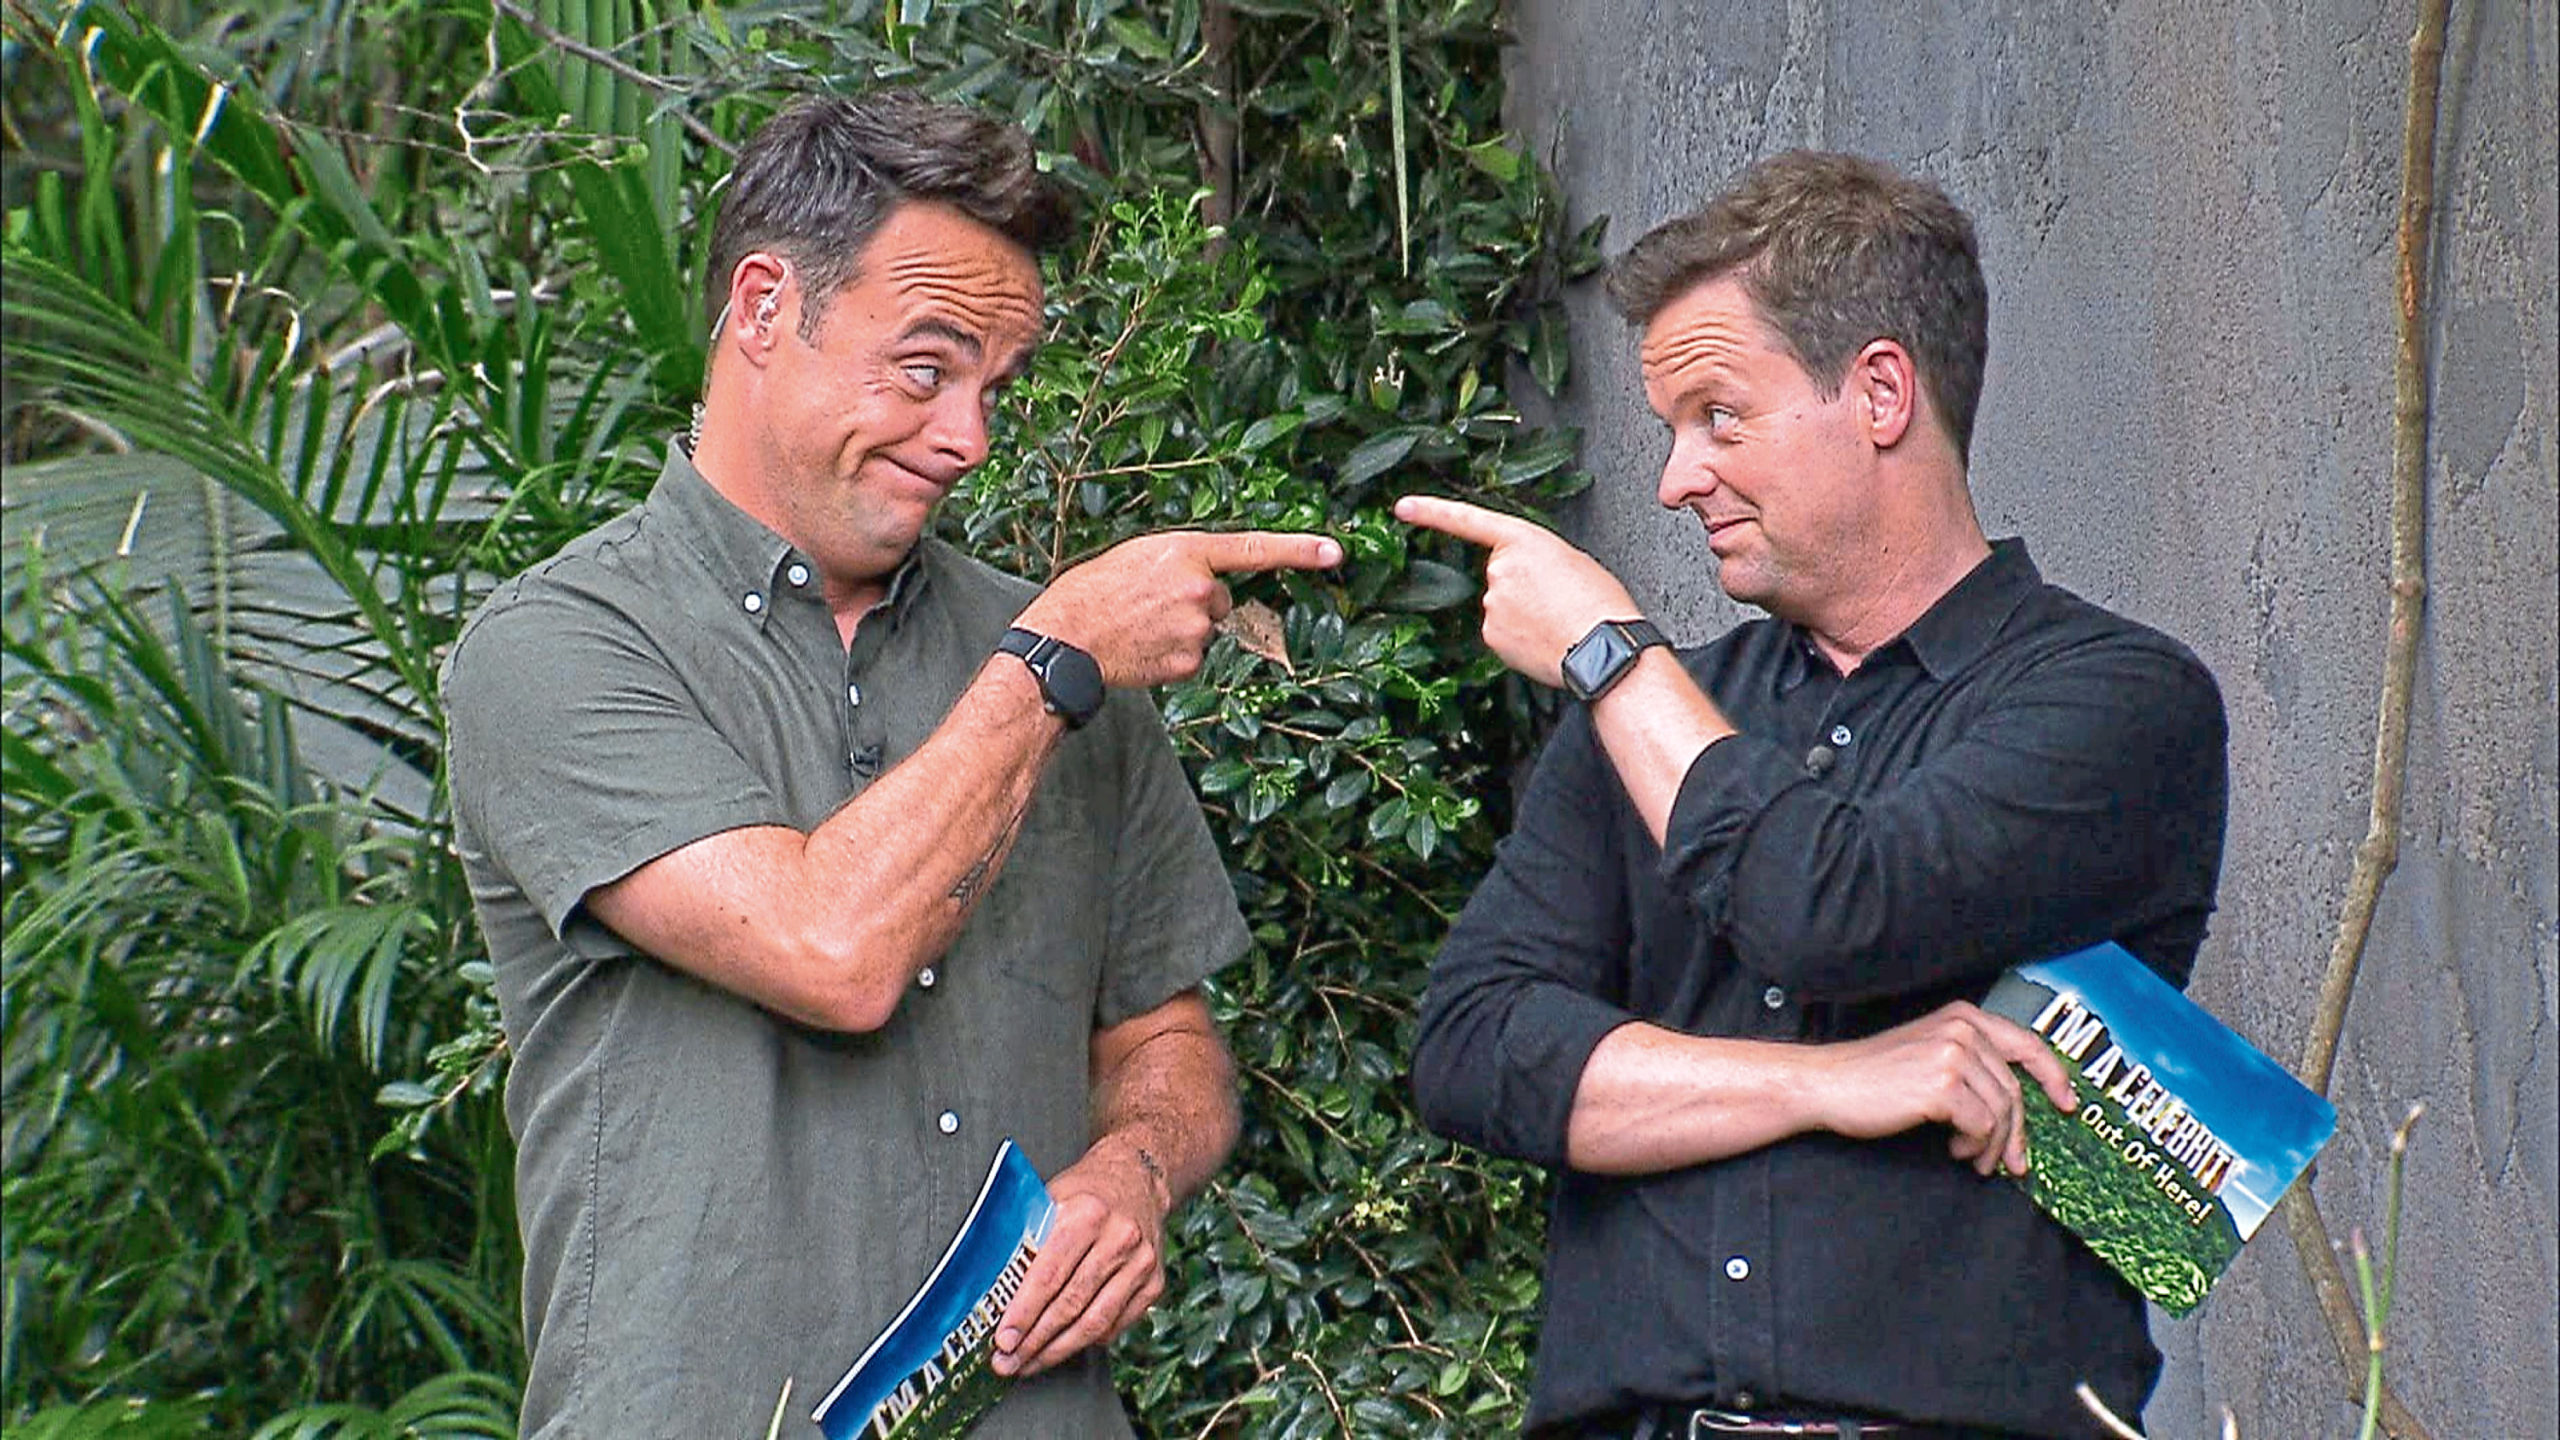 Anthony McPartlin and Declan Donnelly host
'I'm a Celebrity... Get Me Out of Here!'